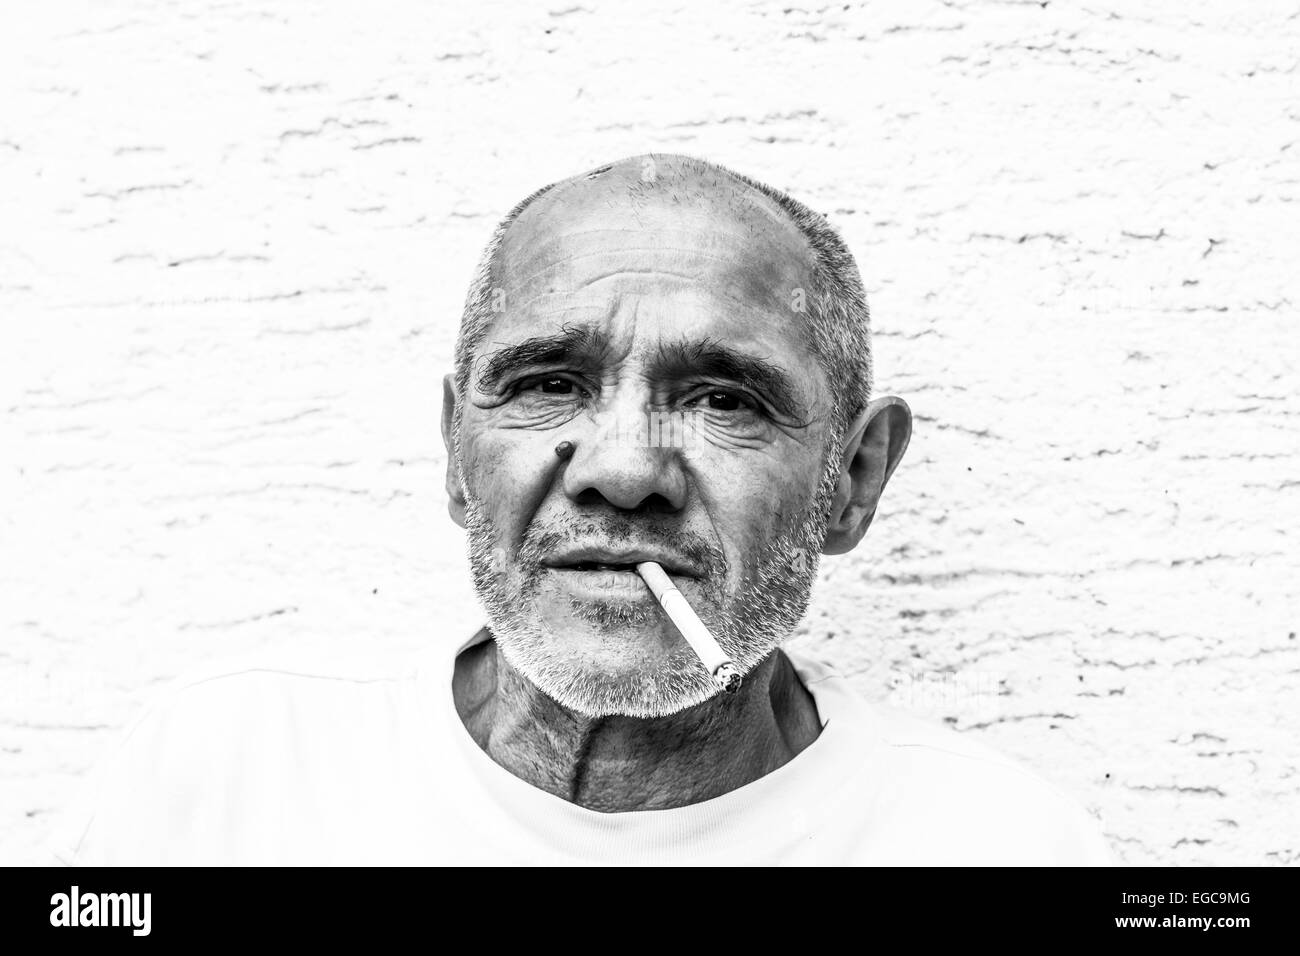 Older hardworking man tired having a break with a cigarette Stock Photo